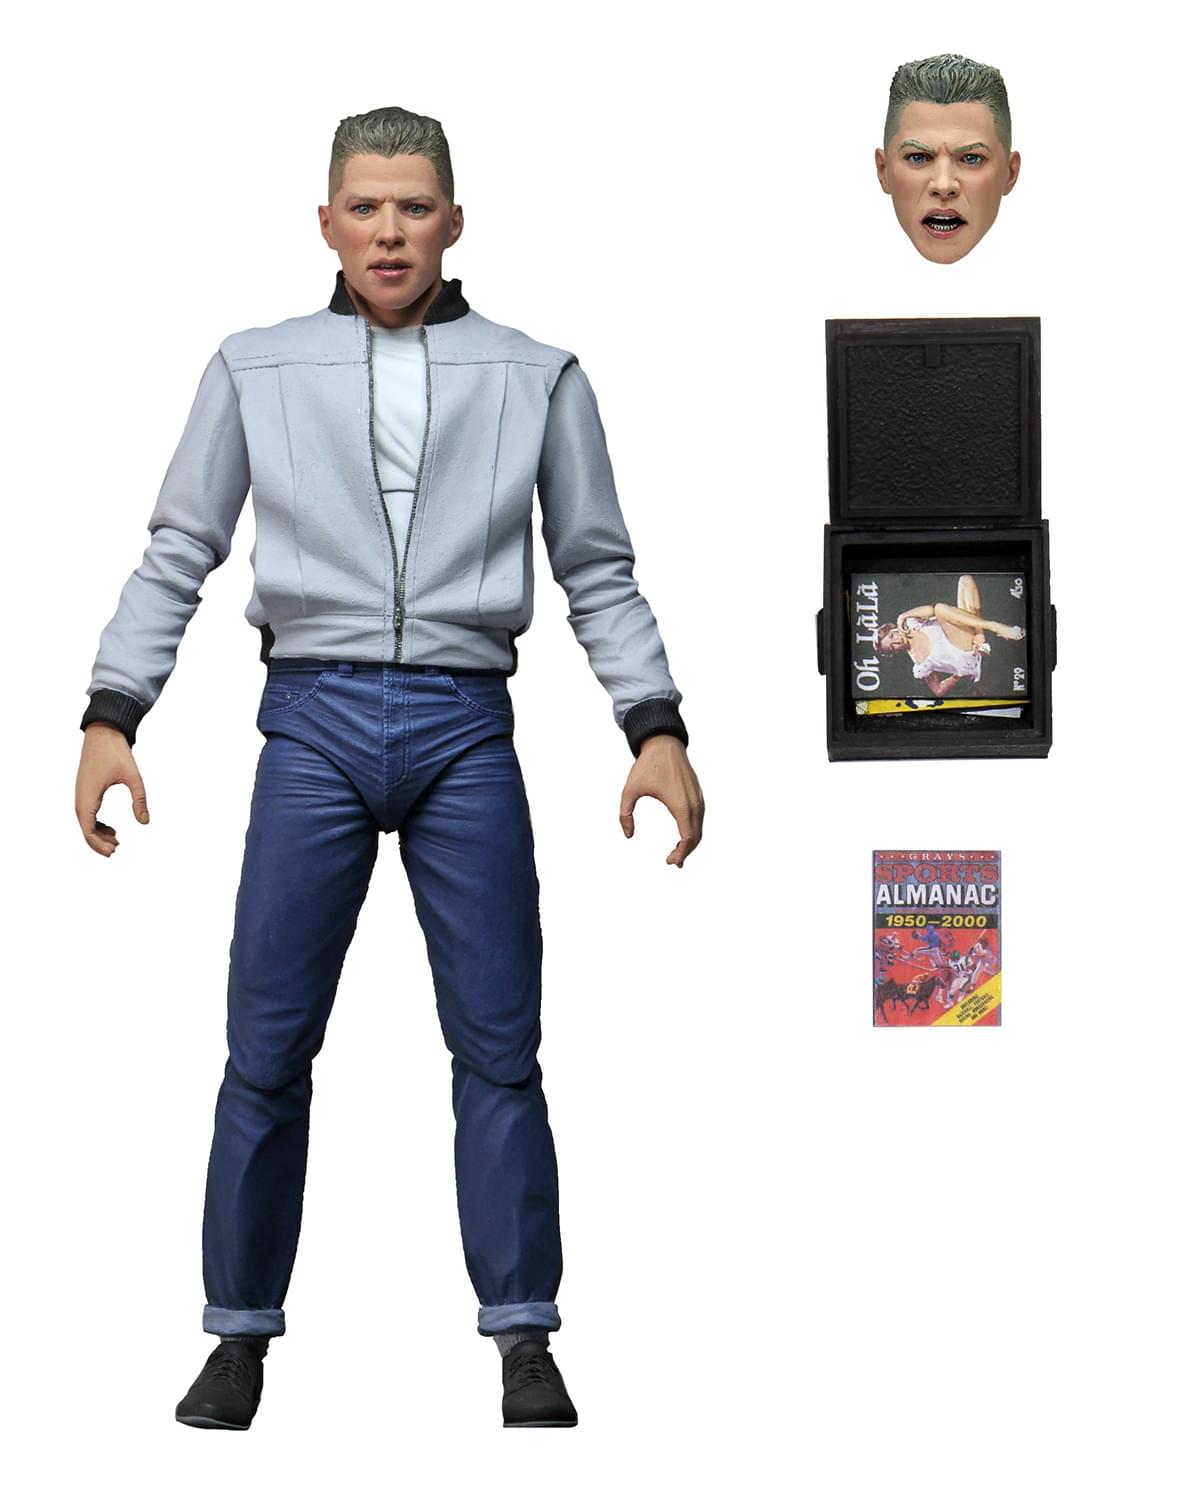 Photos - Action Figures / Transformers NECA Back To The Future 2 Ultimate Biff Tannen 7 Inch Action Figure NEC-53606-C 